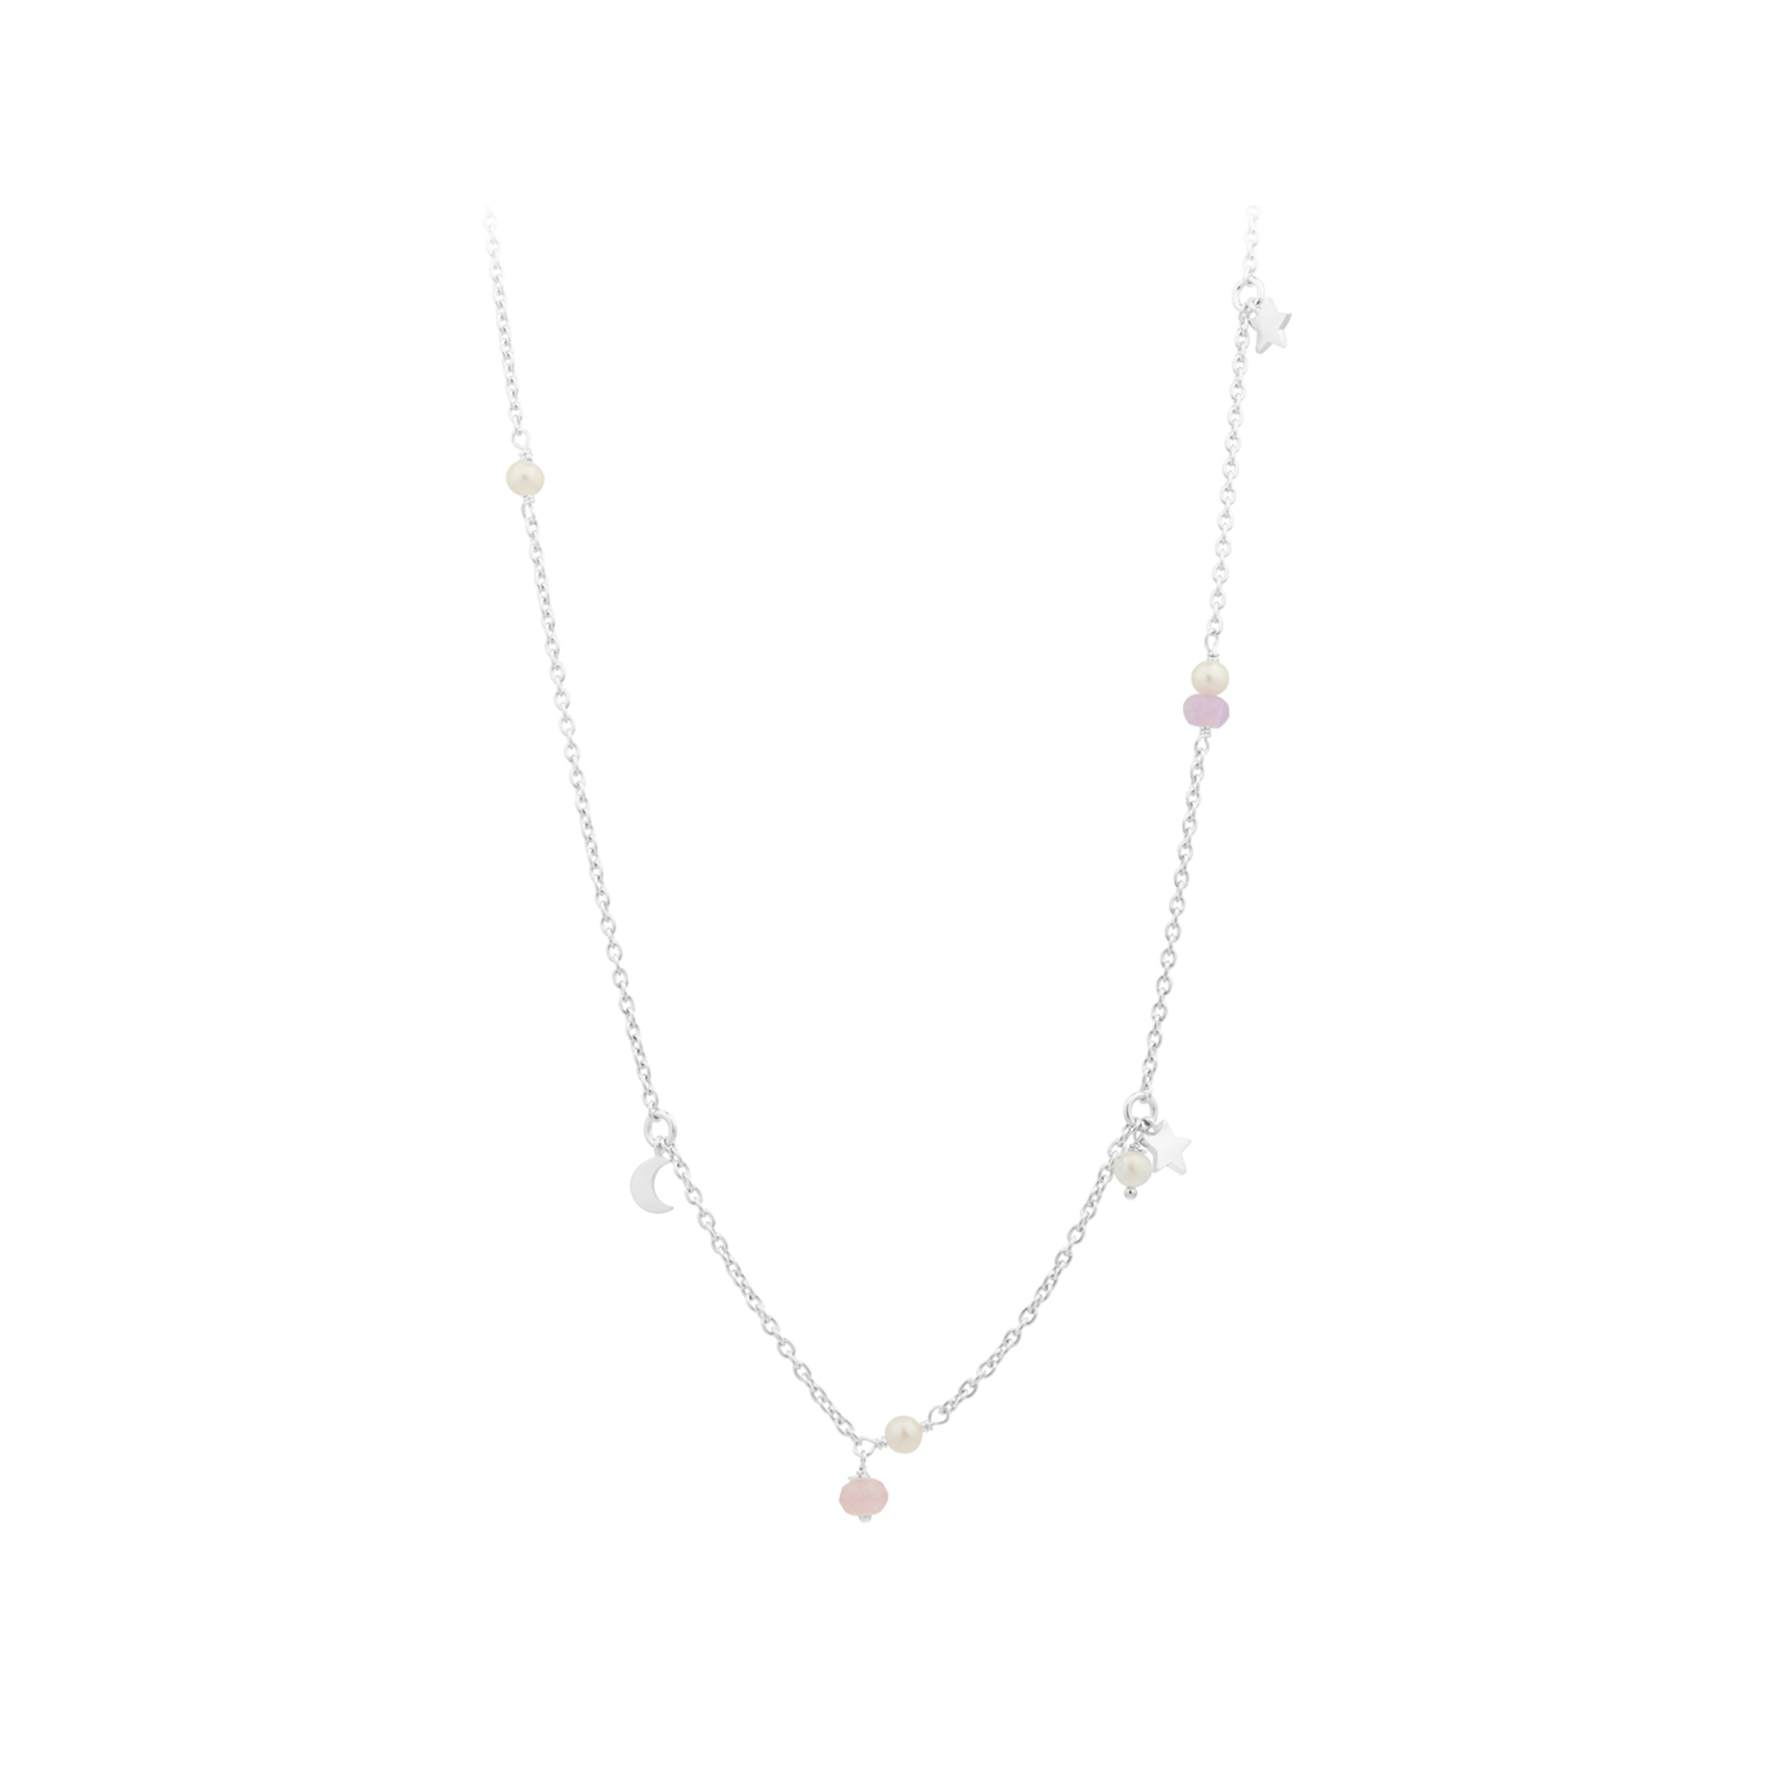 Pastel Dream Necklace von Pernille Corydon in Silber Sterling 925| Pink Agate, Purple Agate,Freshwater Pearl